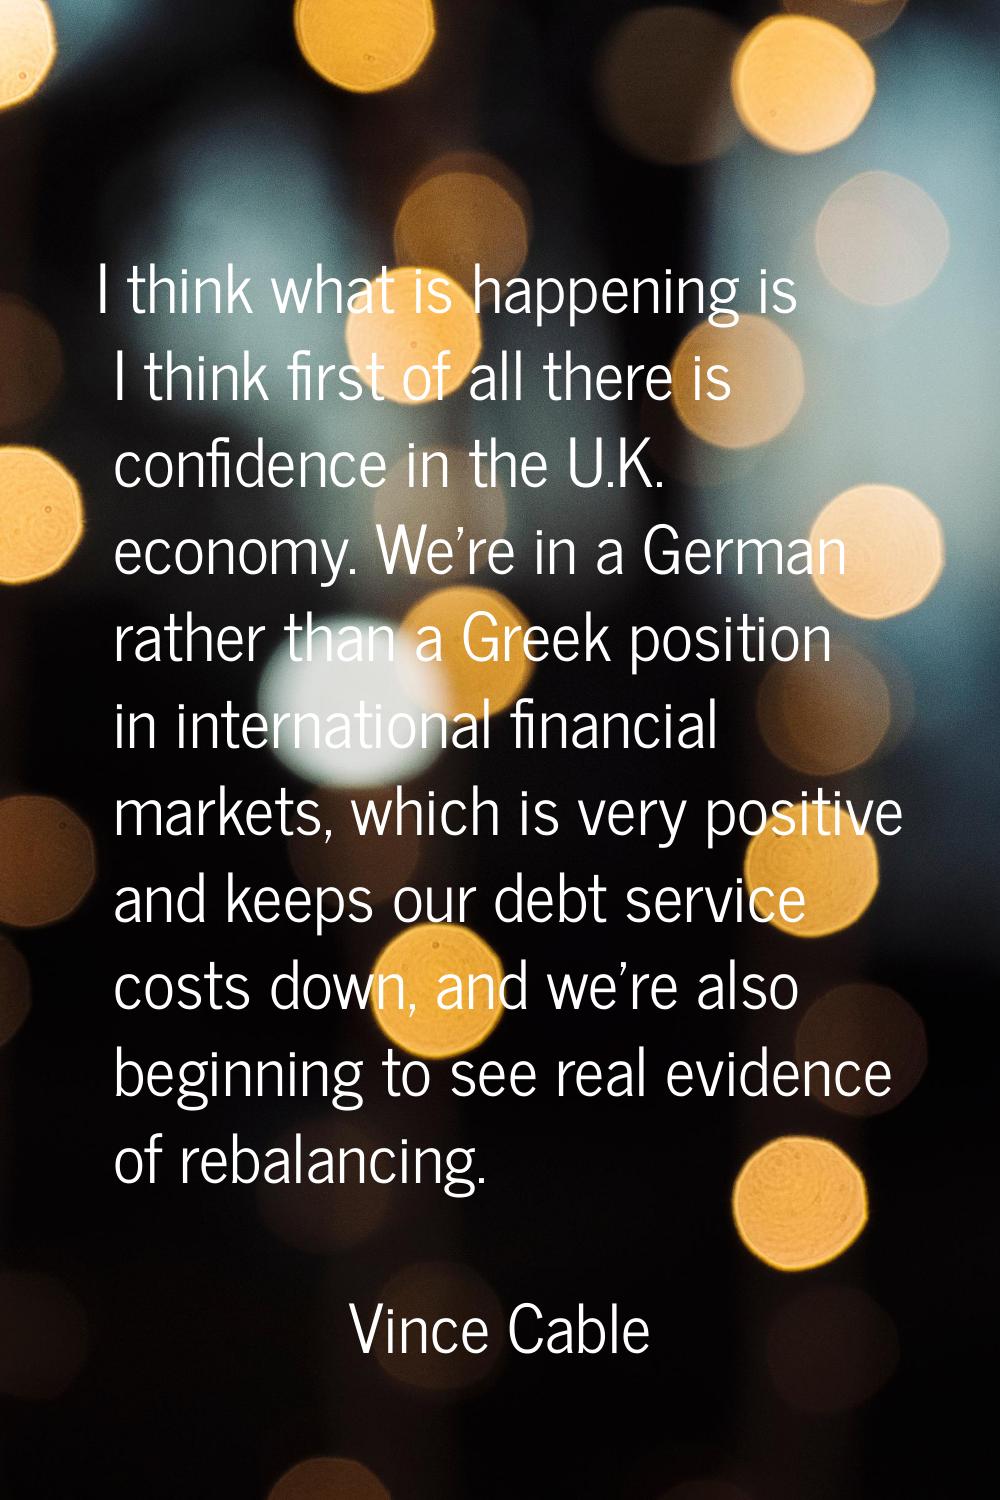 I think what is happening is I think first of all there is confidence in the U.K. economy. We're in